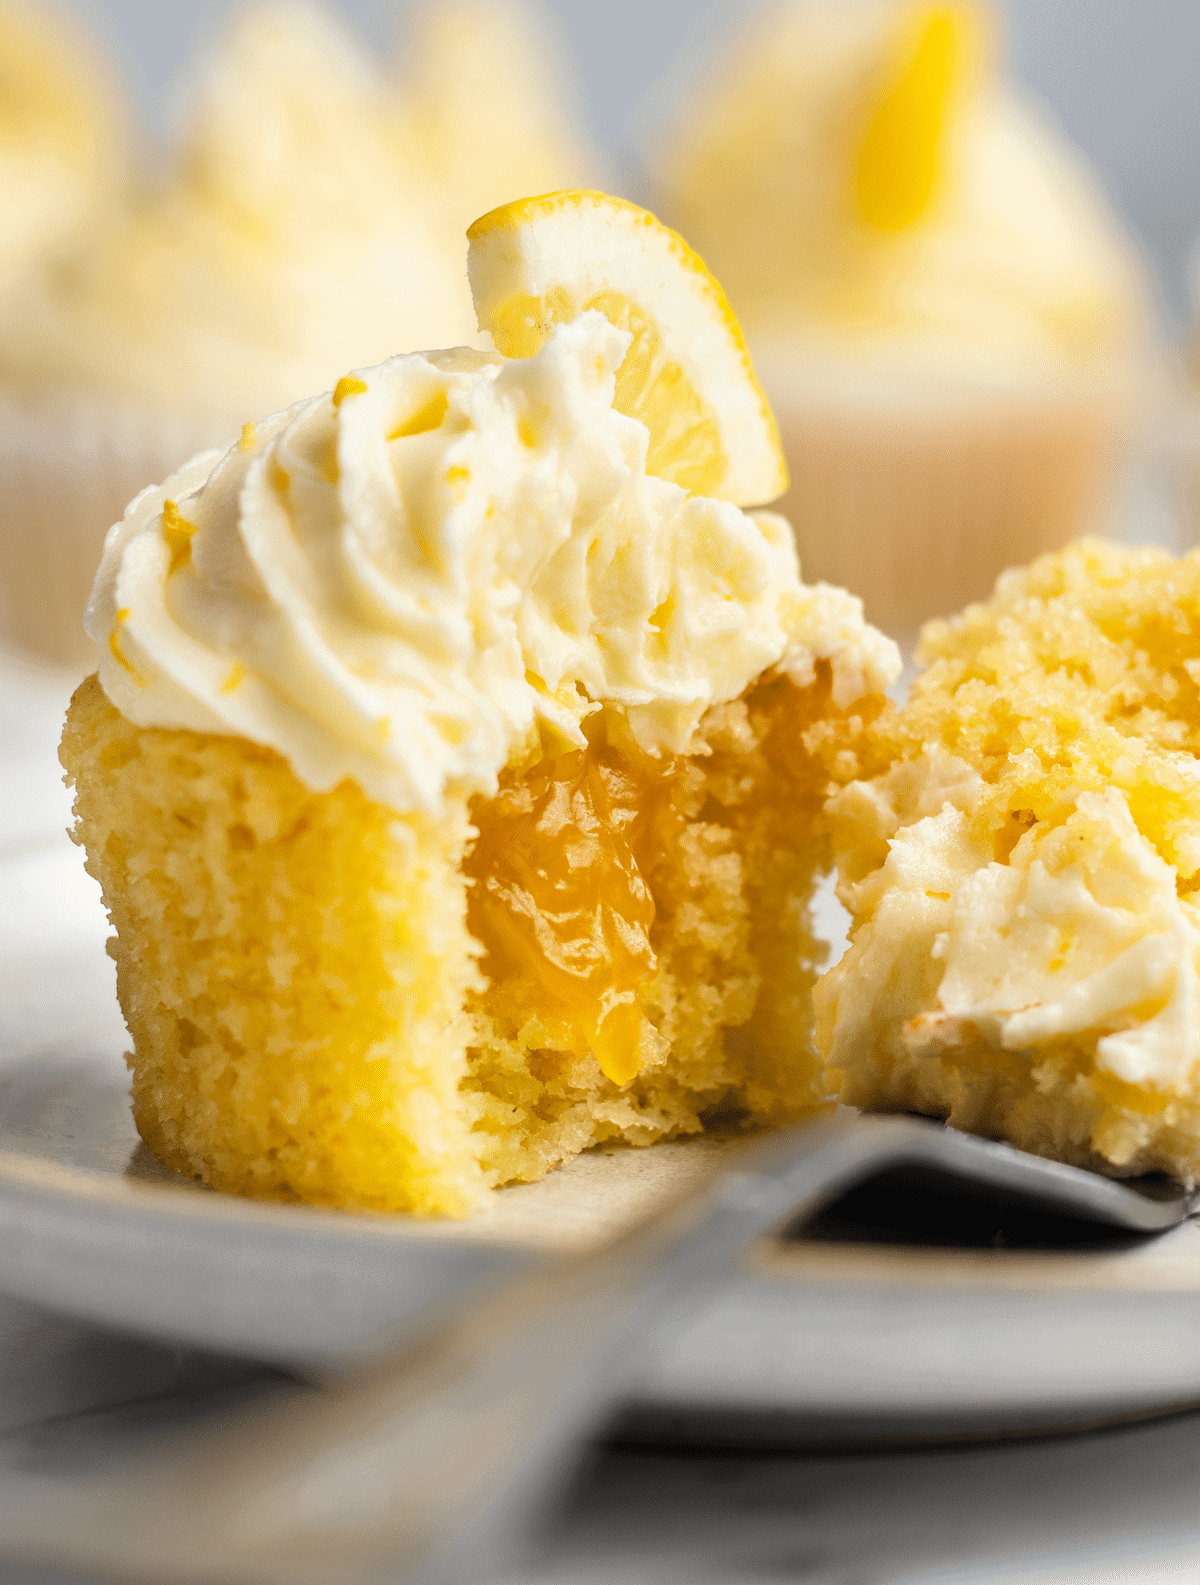 A lemon cupcake on a plate with a bite on a fork